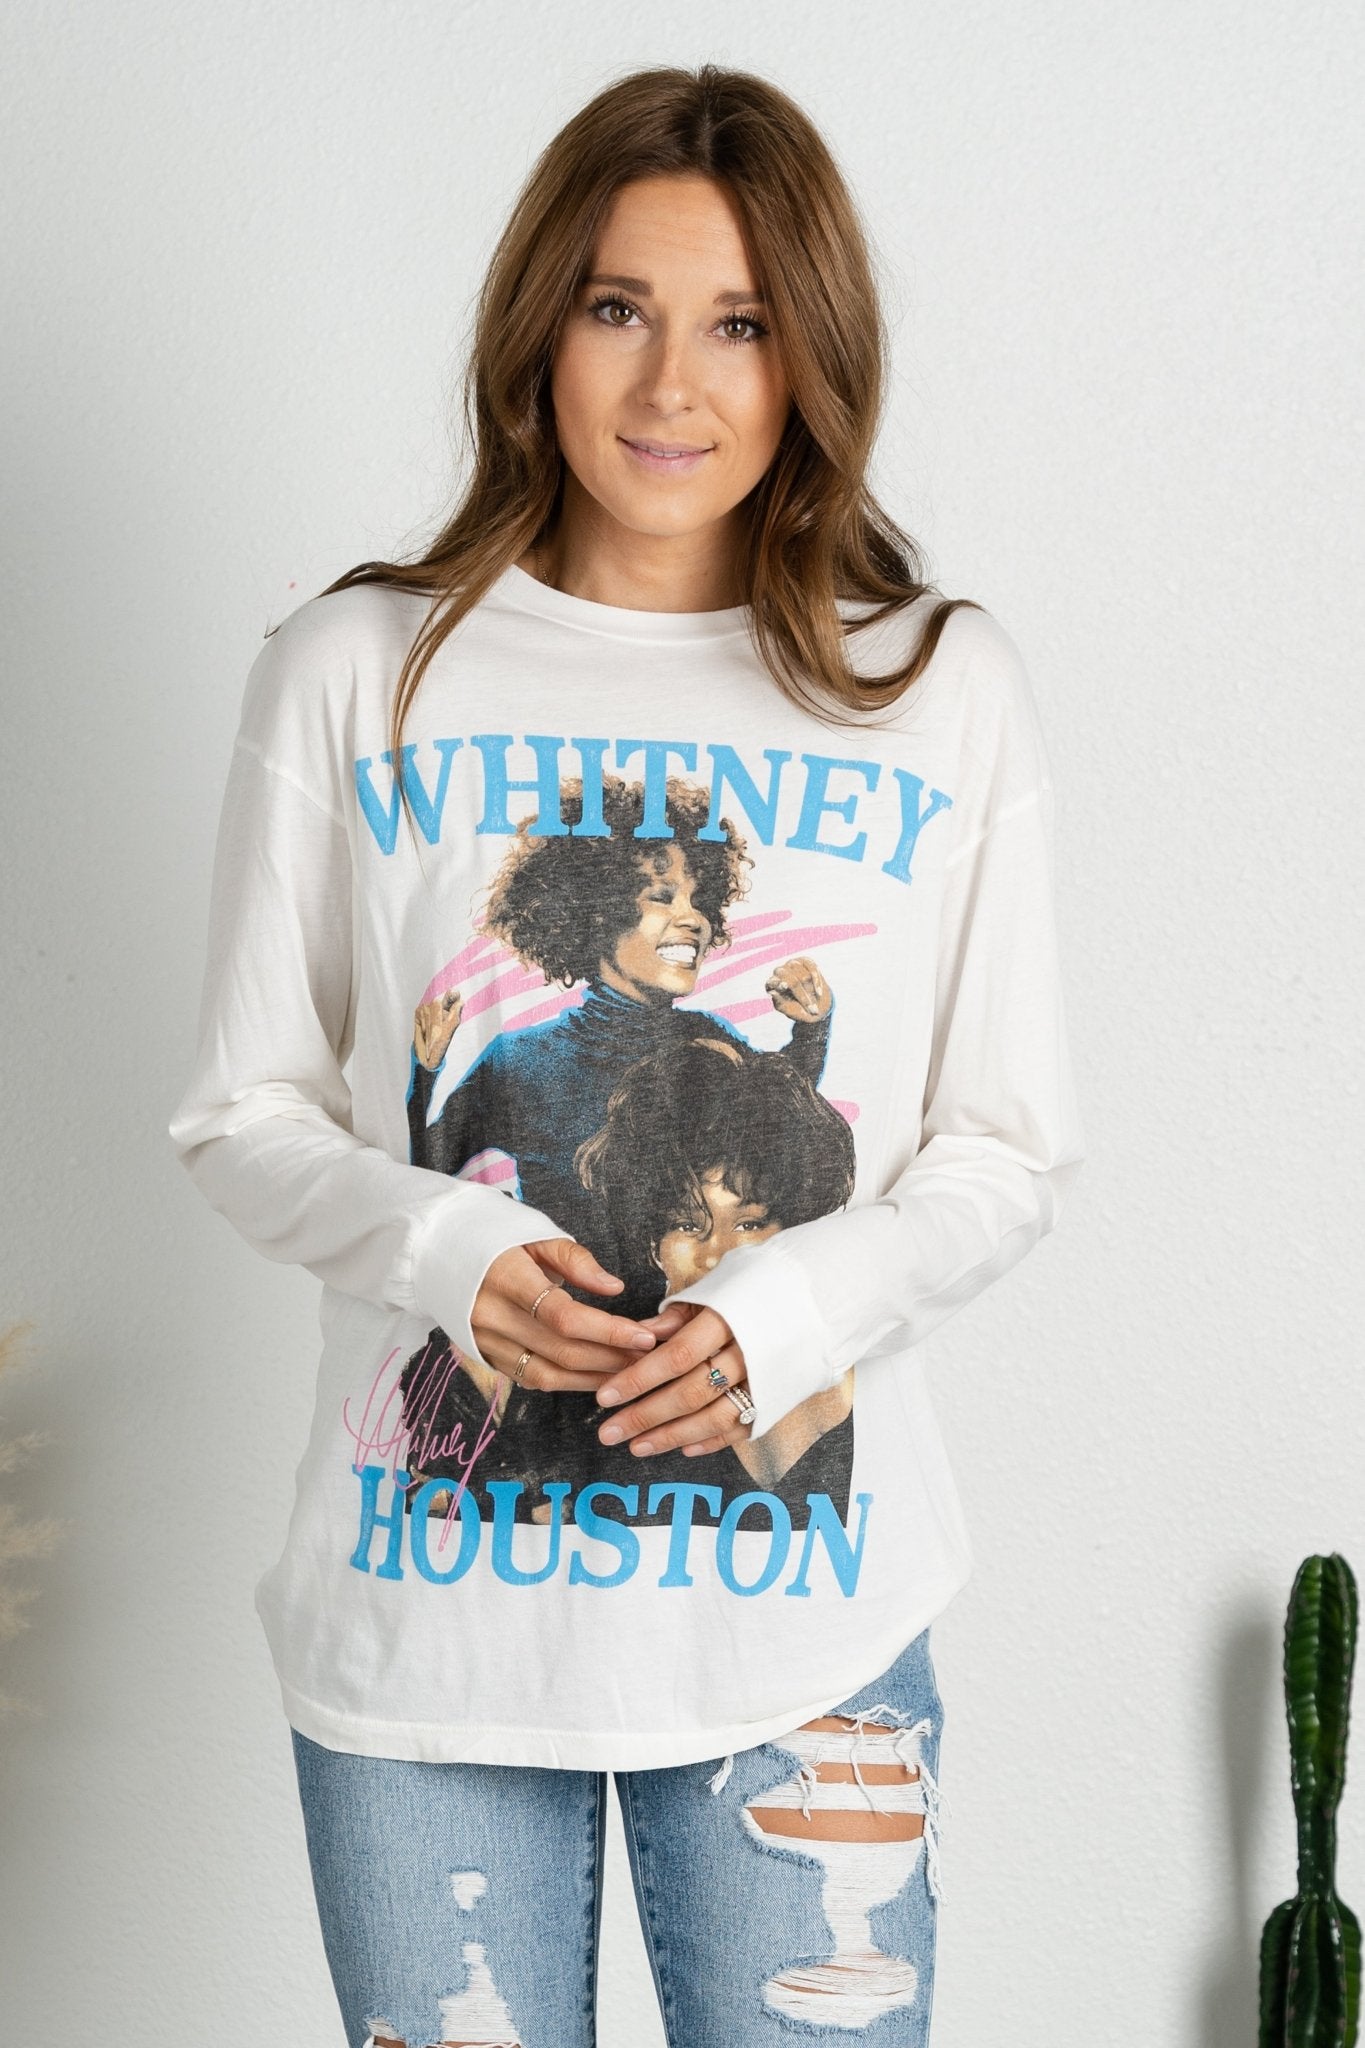 DayDreamer Whitney Houston dance long sleeve tee vintage white - DayDreamer Rock T-Shirts at Lush Fashion Lounge Trendy Boutique in Oklahoma City